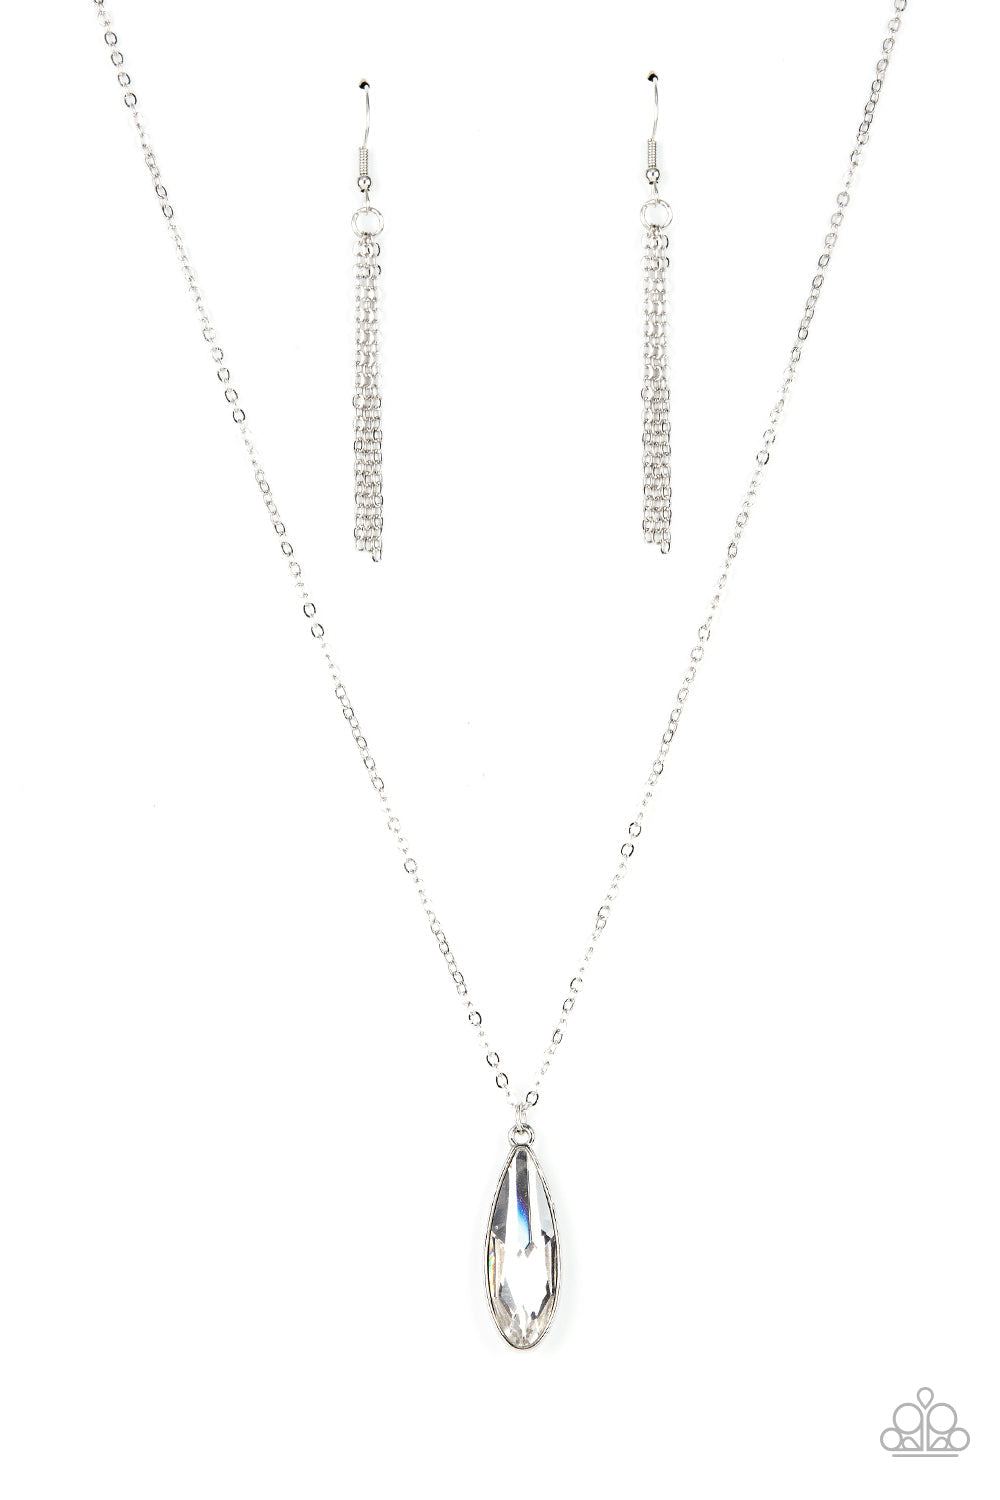 Prismatically Polished - White Gem - Silver Necklace - Encased in a sleek silver fitting, an elongated white teardrop gem swings from the bottom of a classic silver chain below the collar for a timeless elegance. Features an adjustable clasp closure.